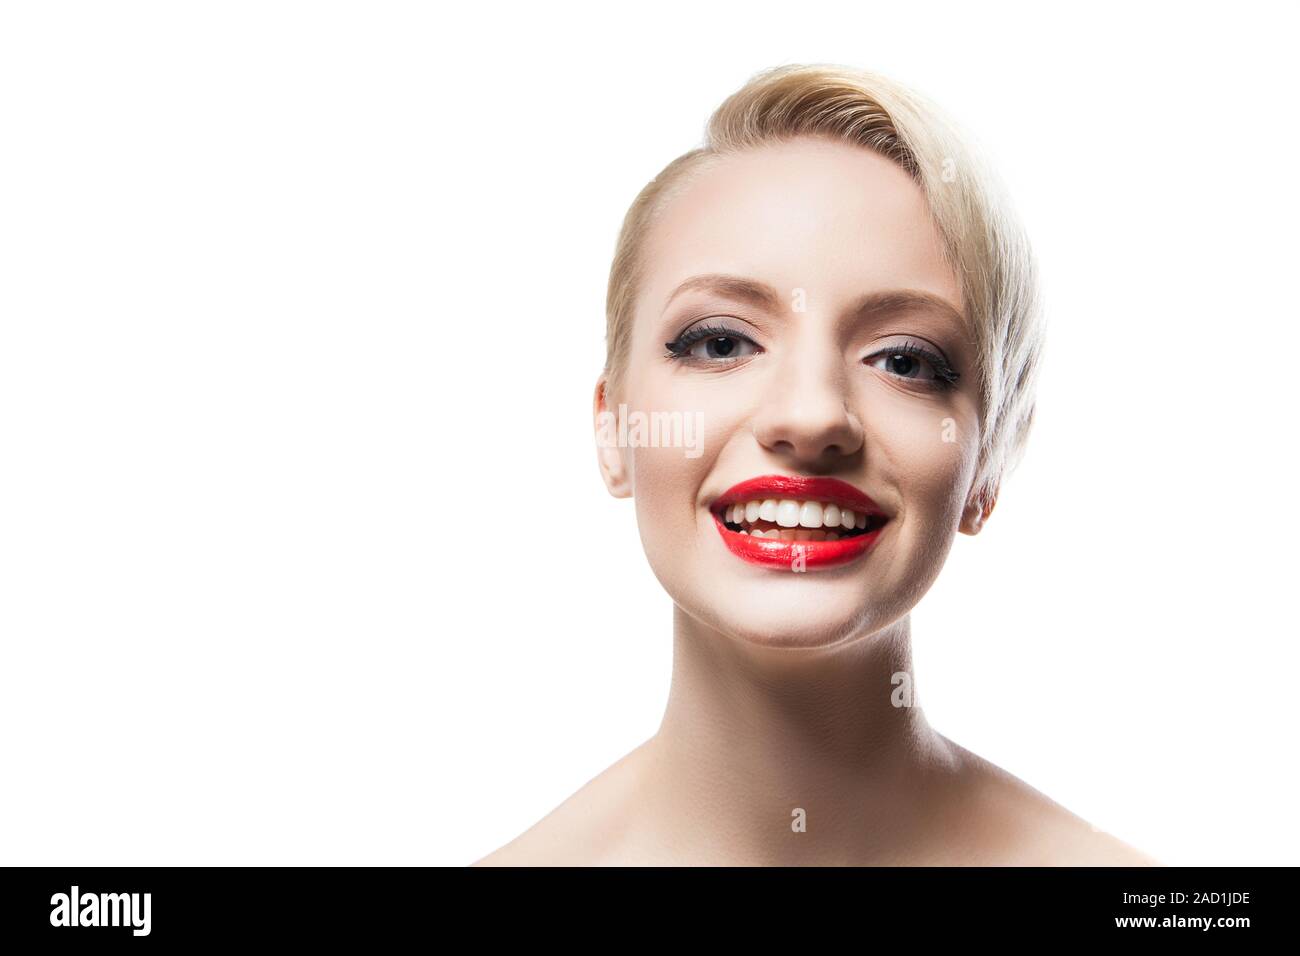 Cheerful blonde-haired model with red lips smiling at camera Stock Photo